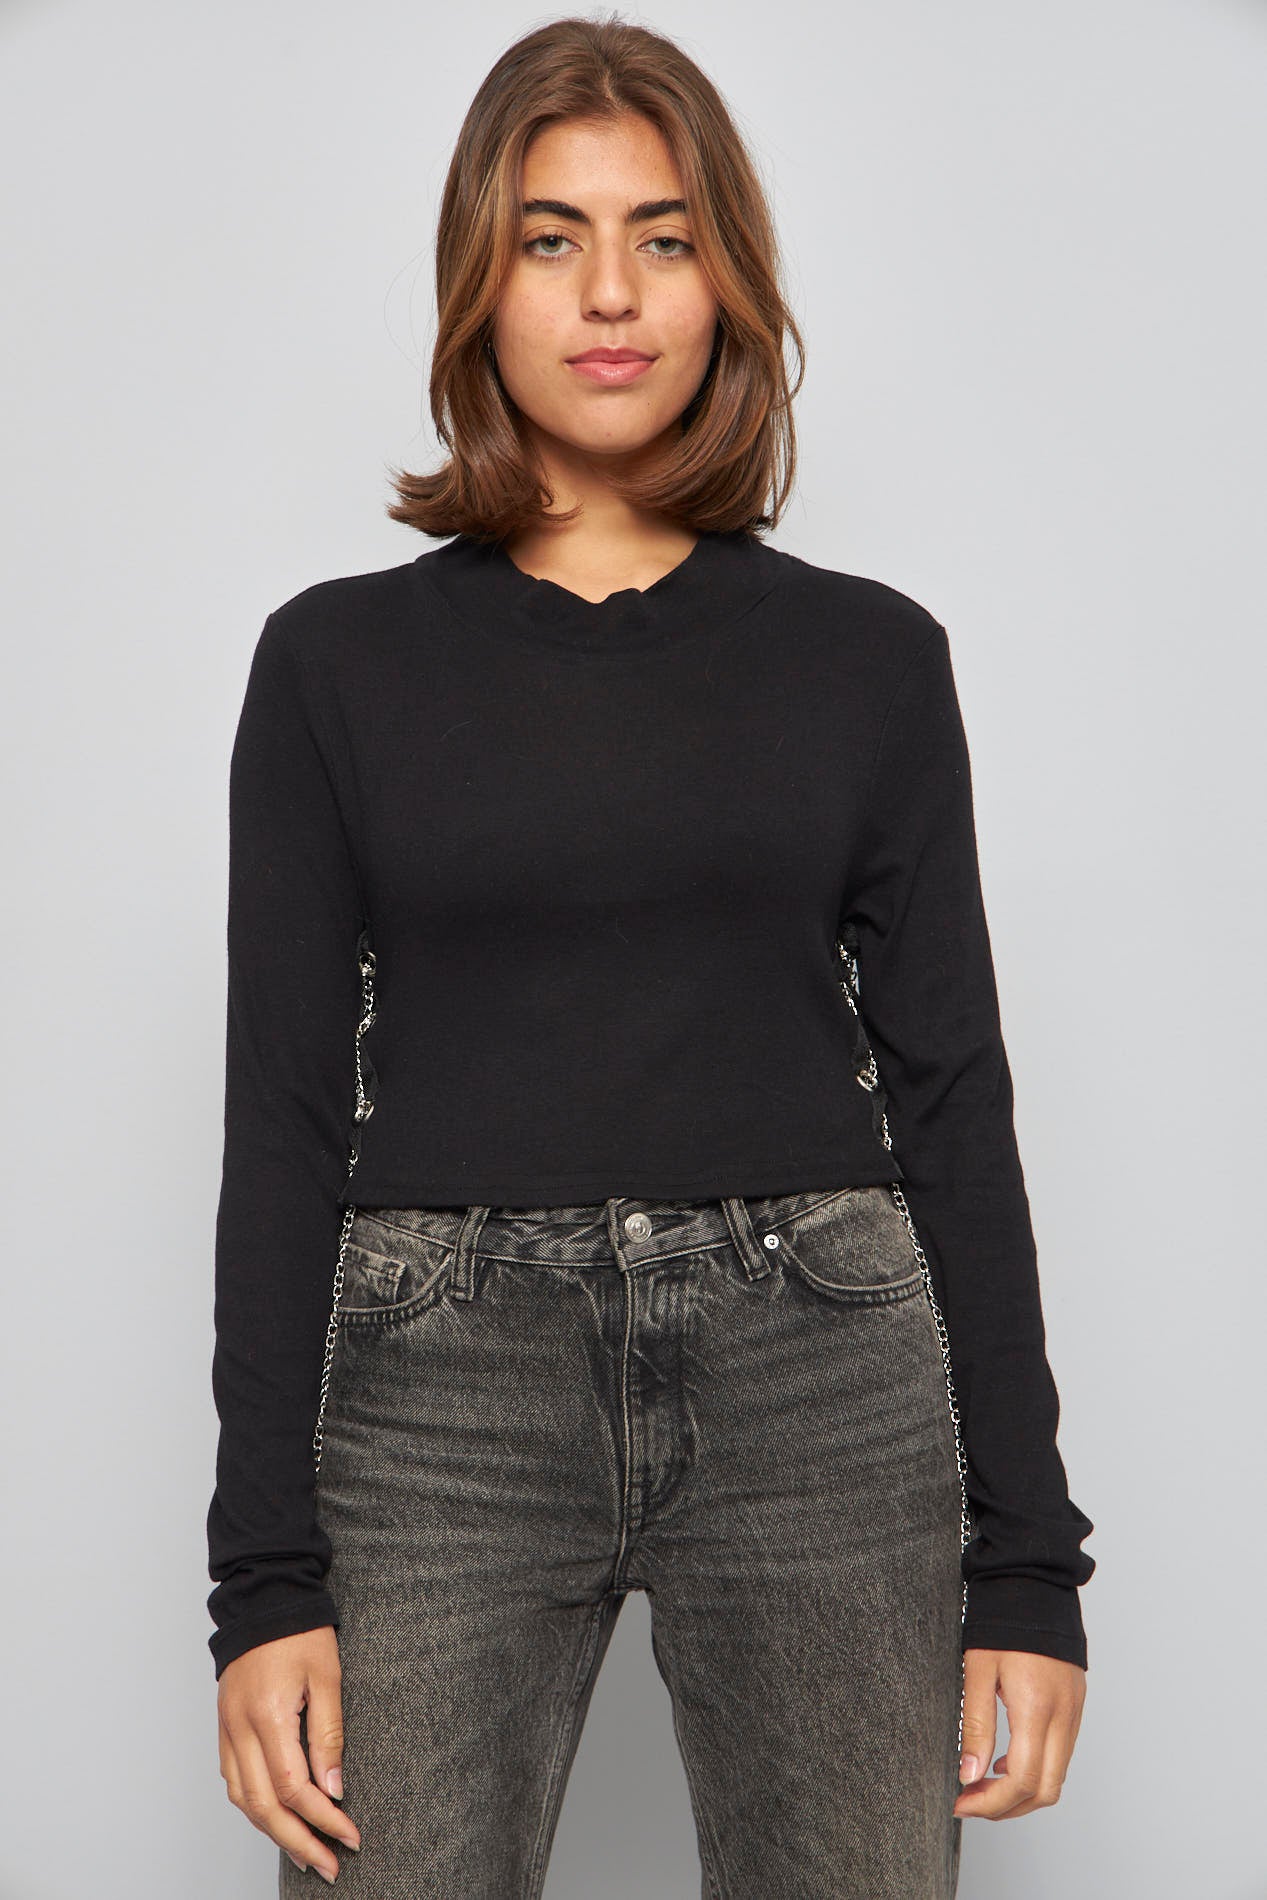 Top casual  negro old navy talla M 588